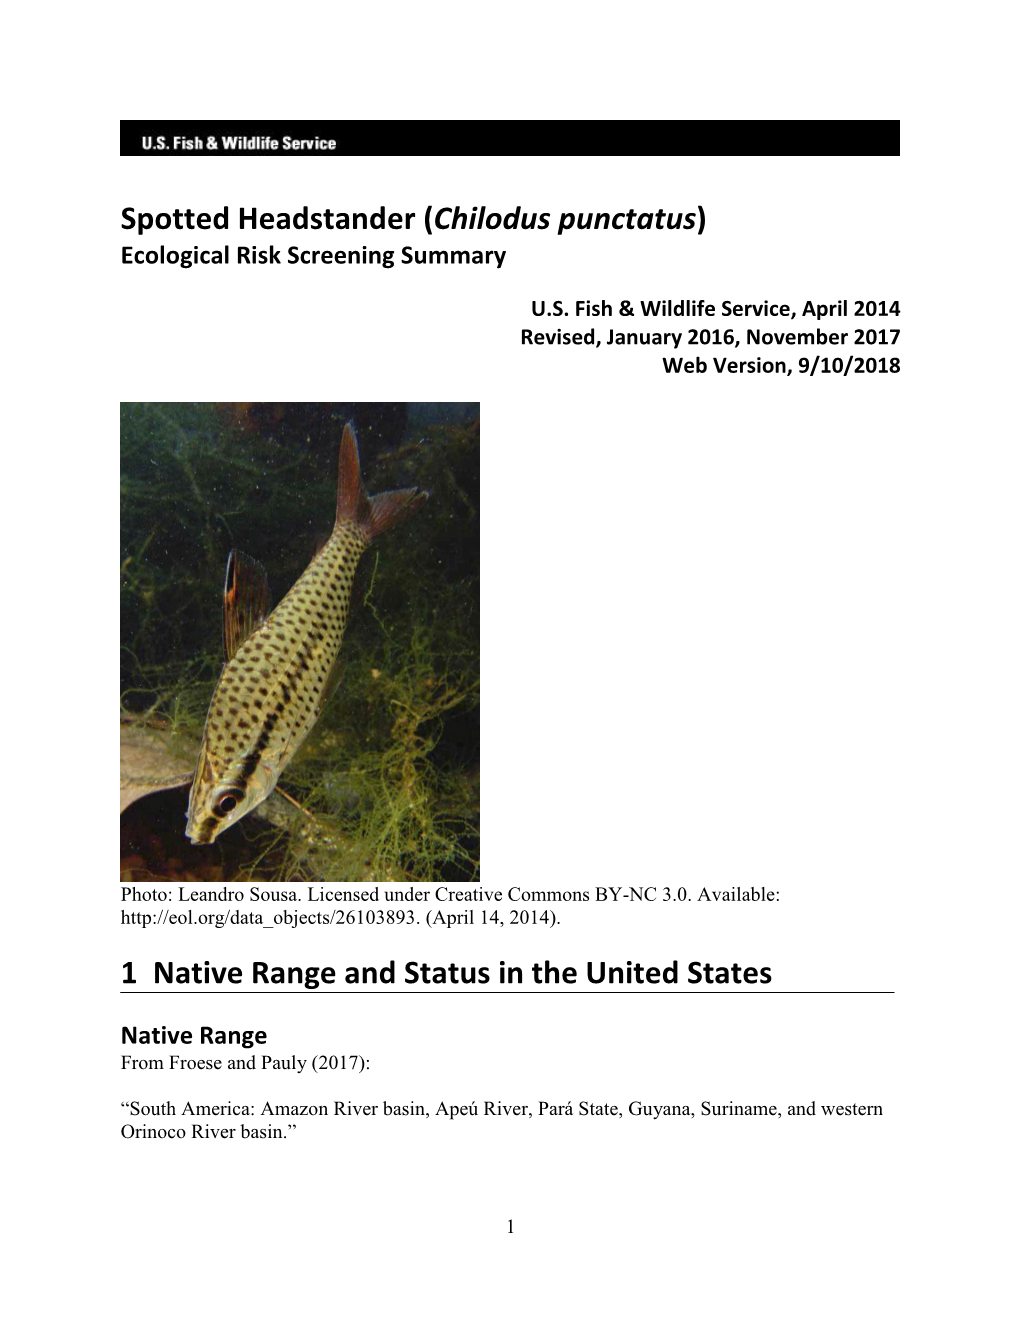 Spotted Headstander (Chilodus Punctatus) Ecological Risk Screening Summary